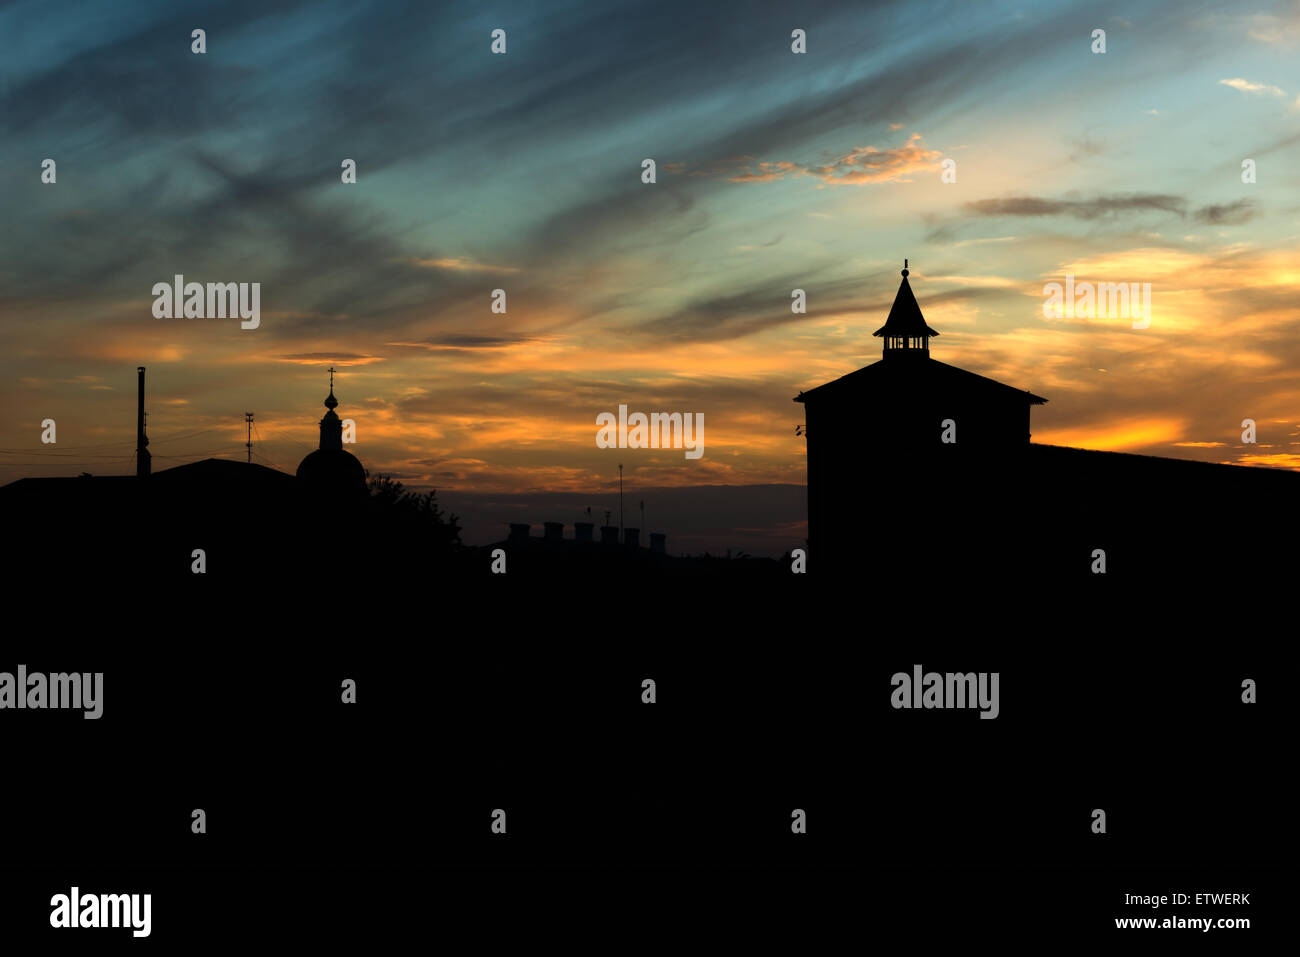 silhouette of the old town and the fortress tower at sunset on a sky background. Kolomna - ancient Russian city Stock Photo